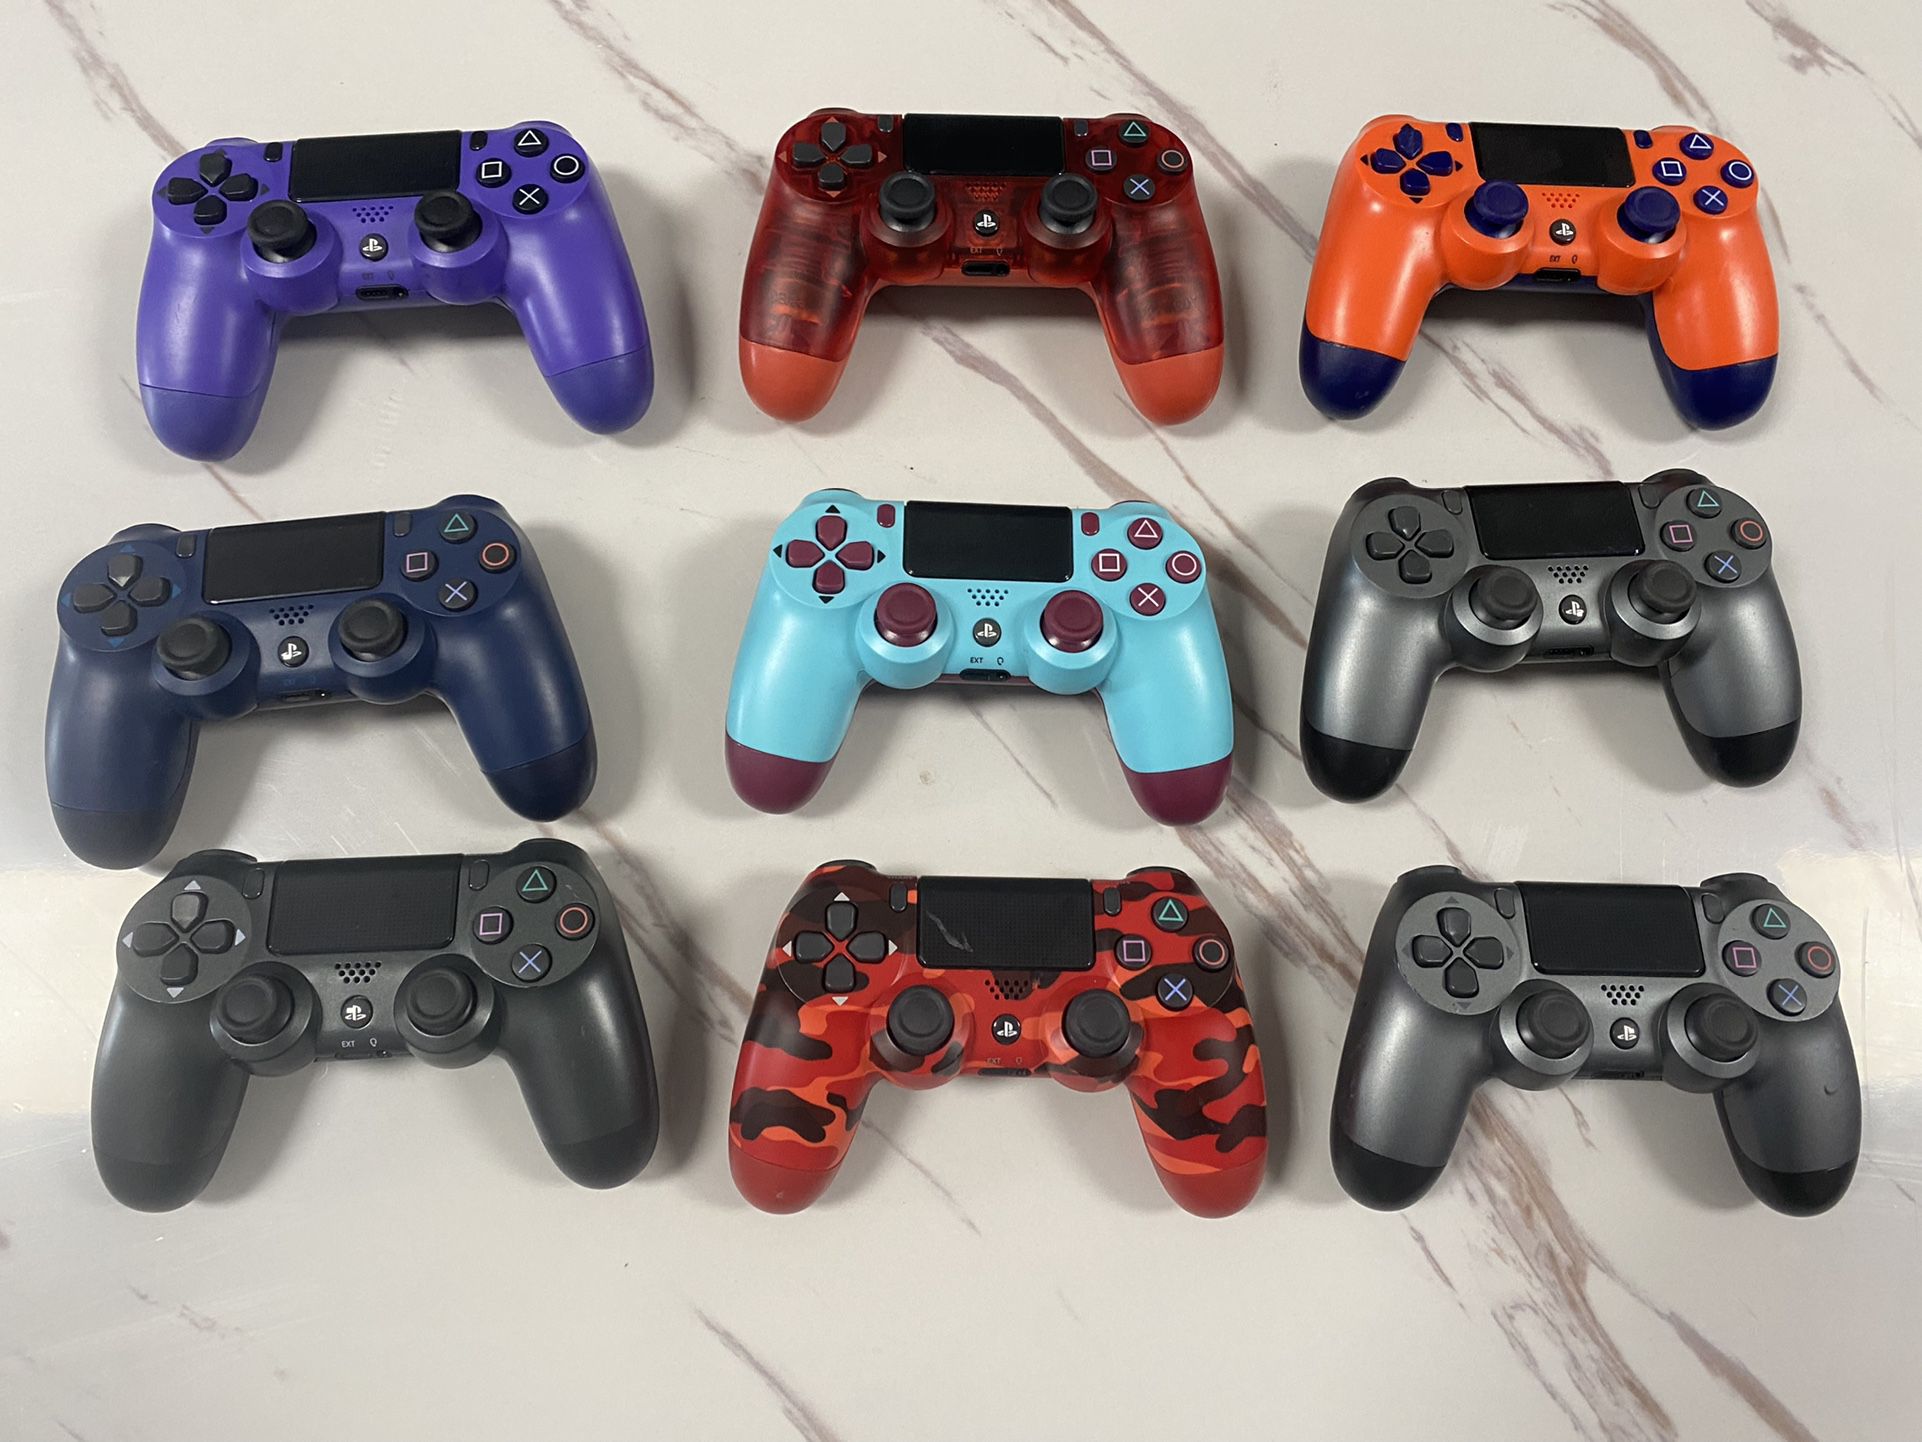 PS4 Controllers - Select Color - New Condition